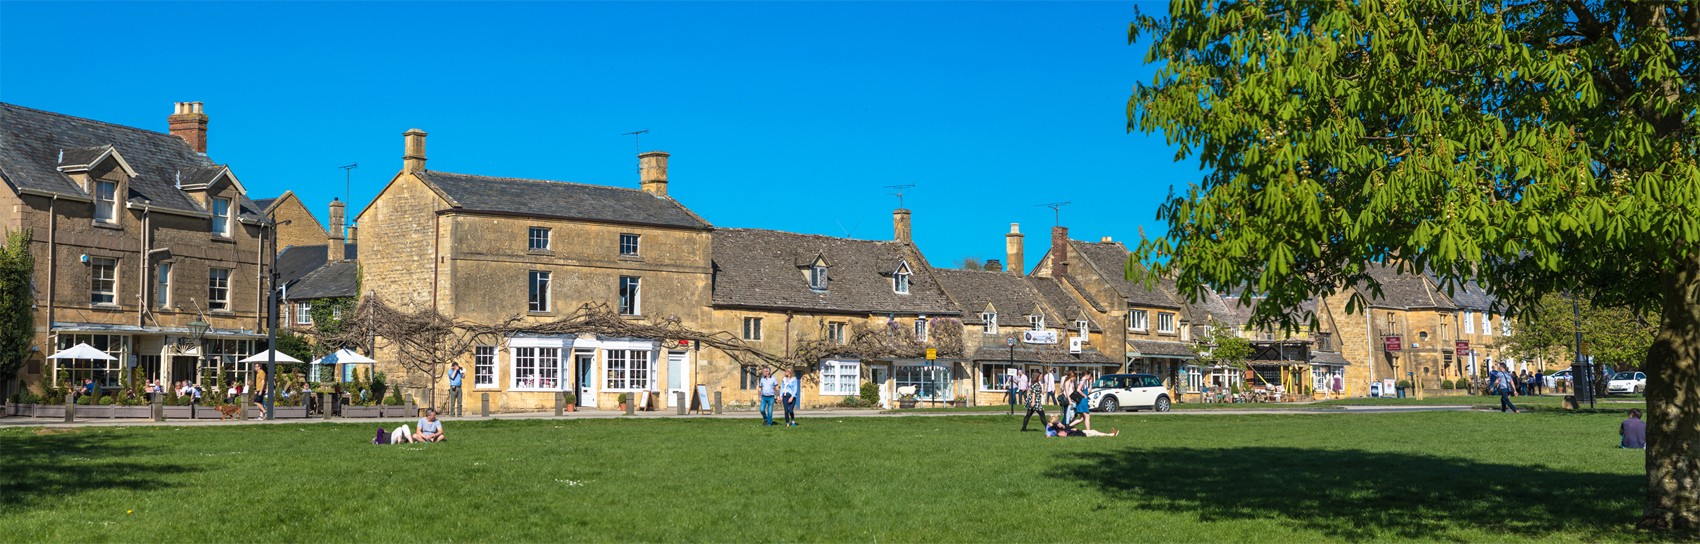 The village of Broadway in the Cotswolds. Photograph by IAN KENNEDY